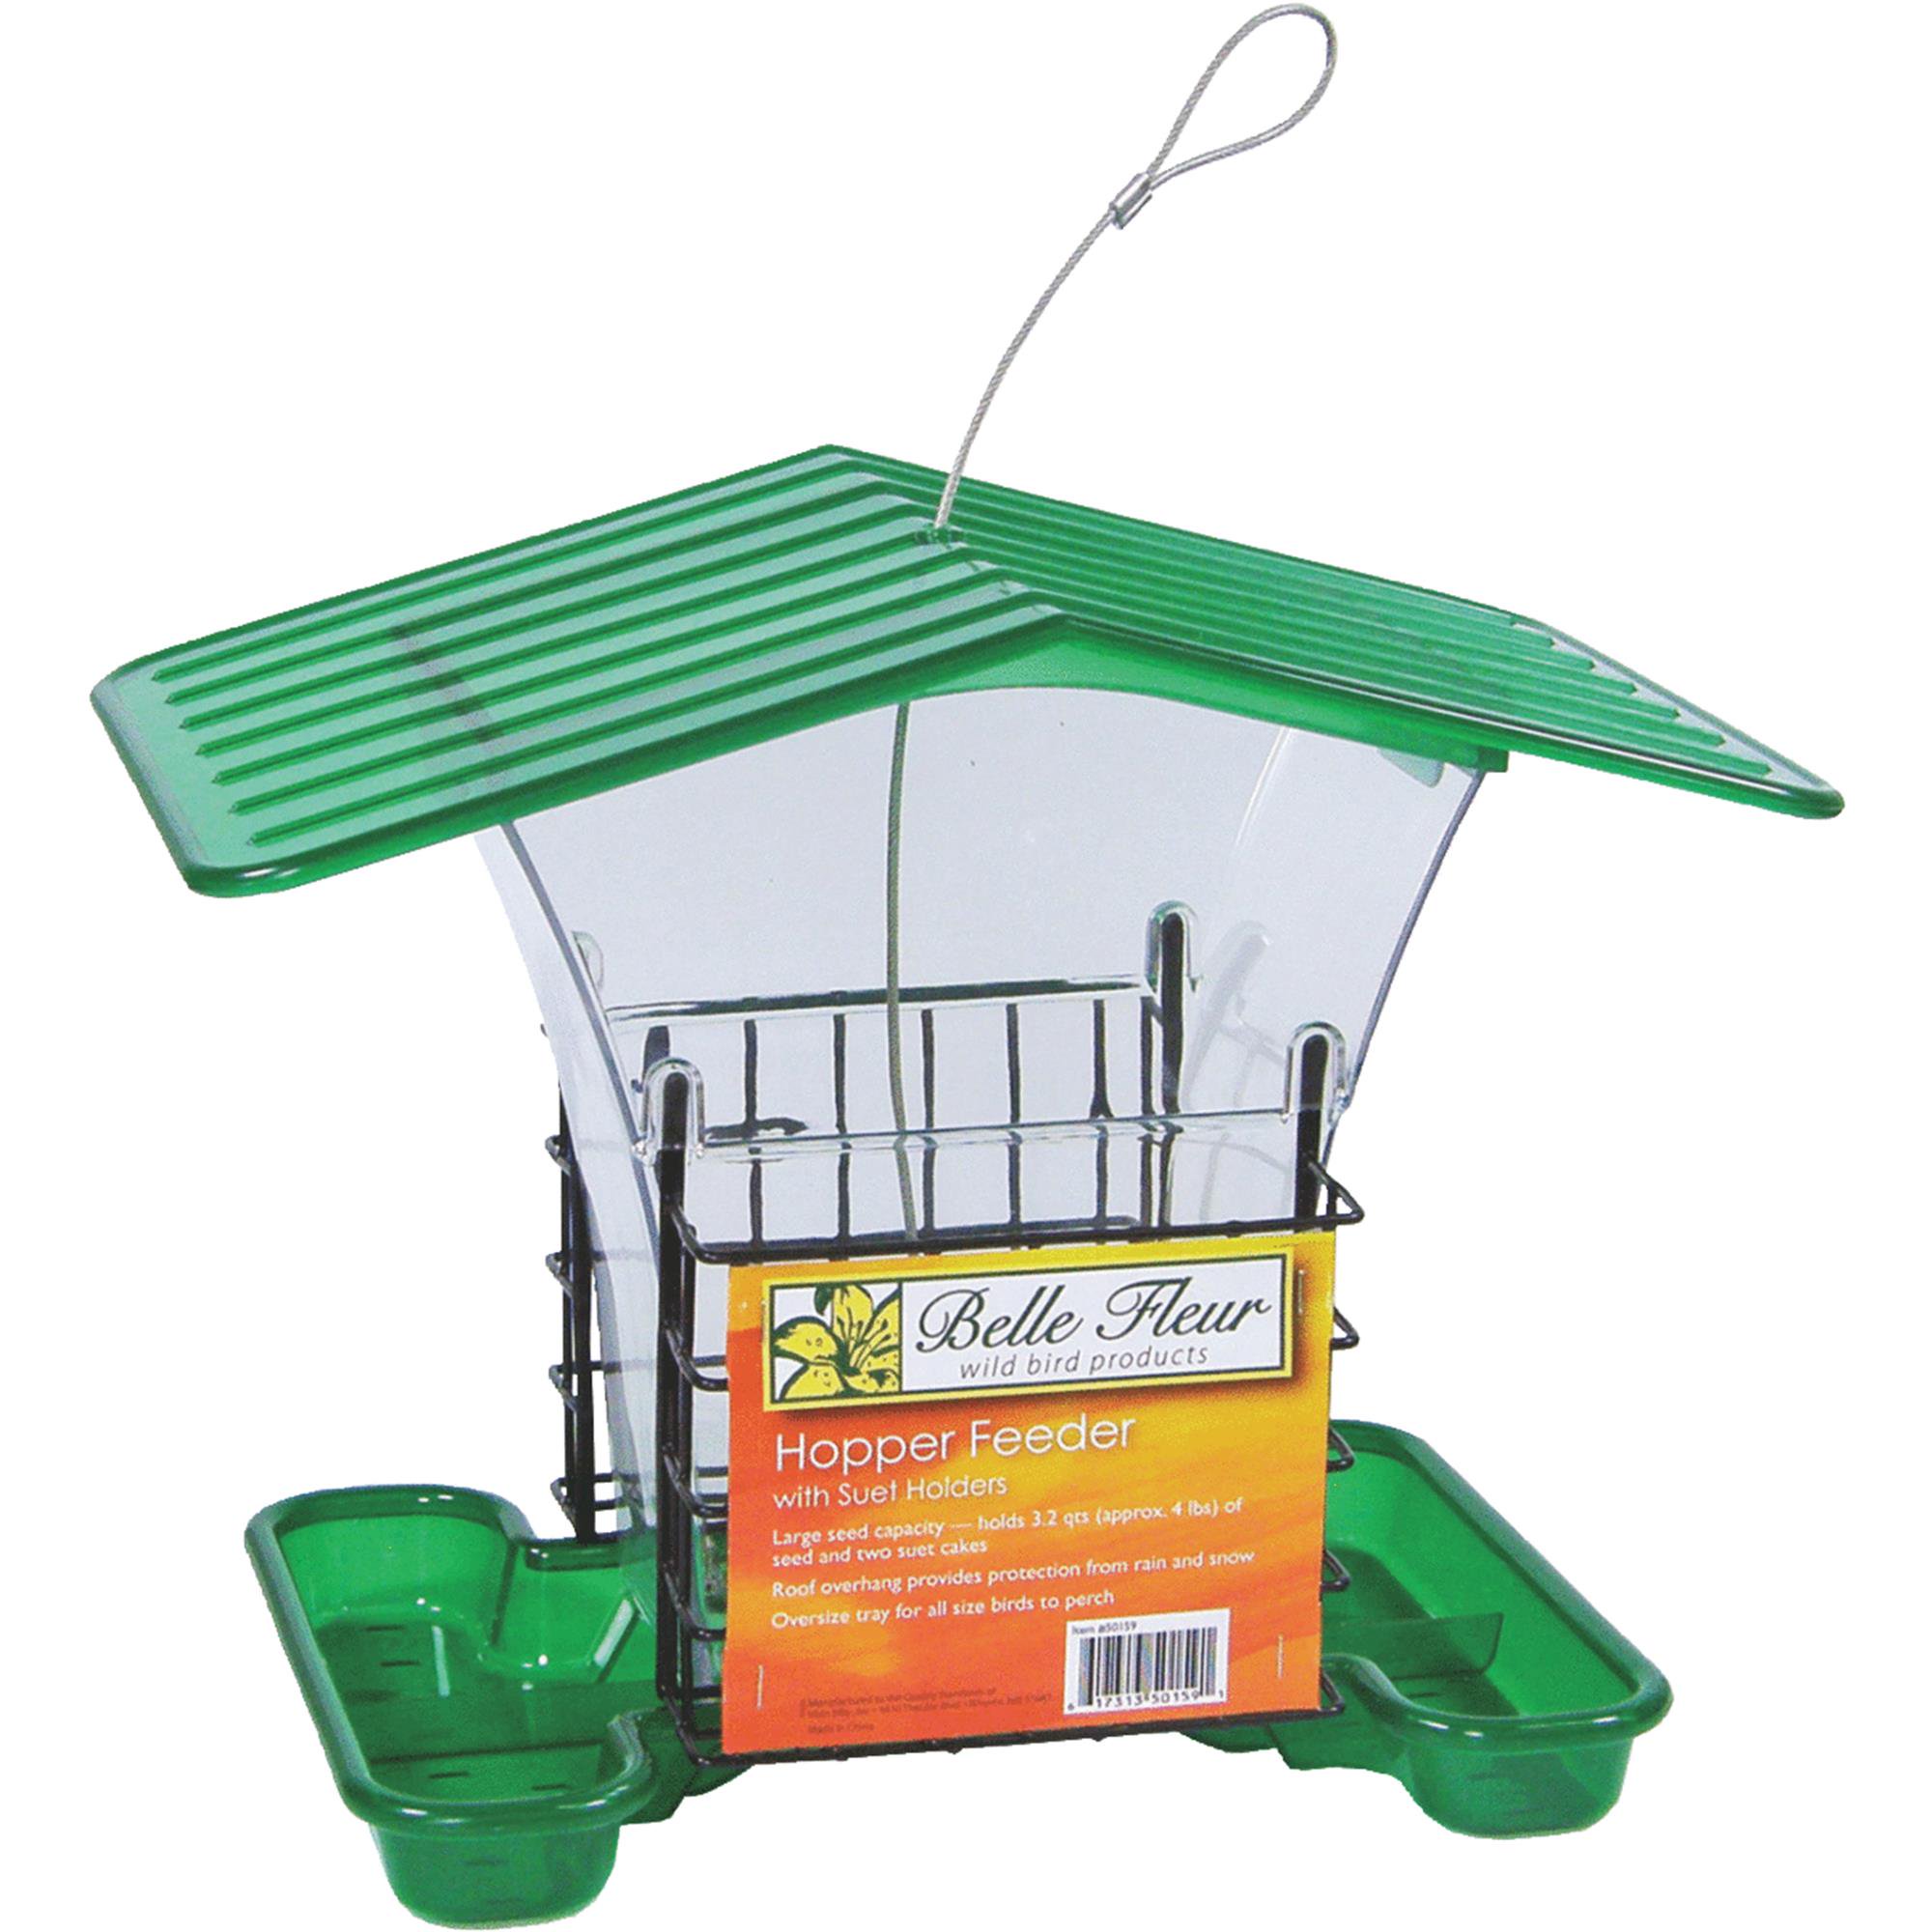 Stokes Select Belle Fleur Green Plastic Covered Hopper Bird Feeder with Suet Holders - image 1 of 2